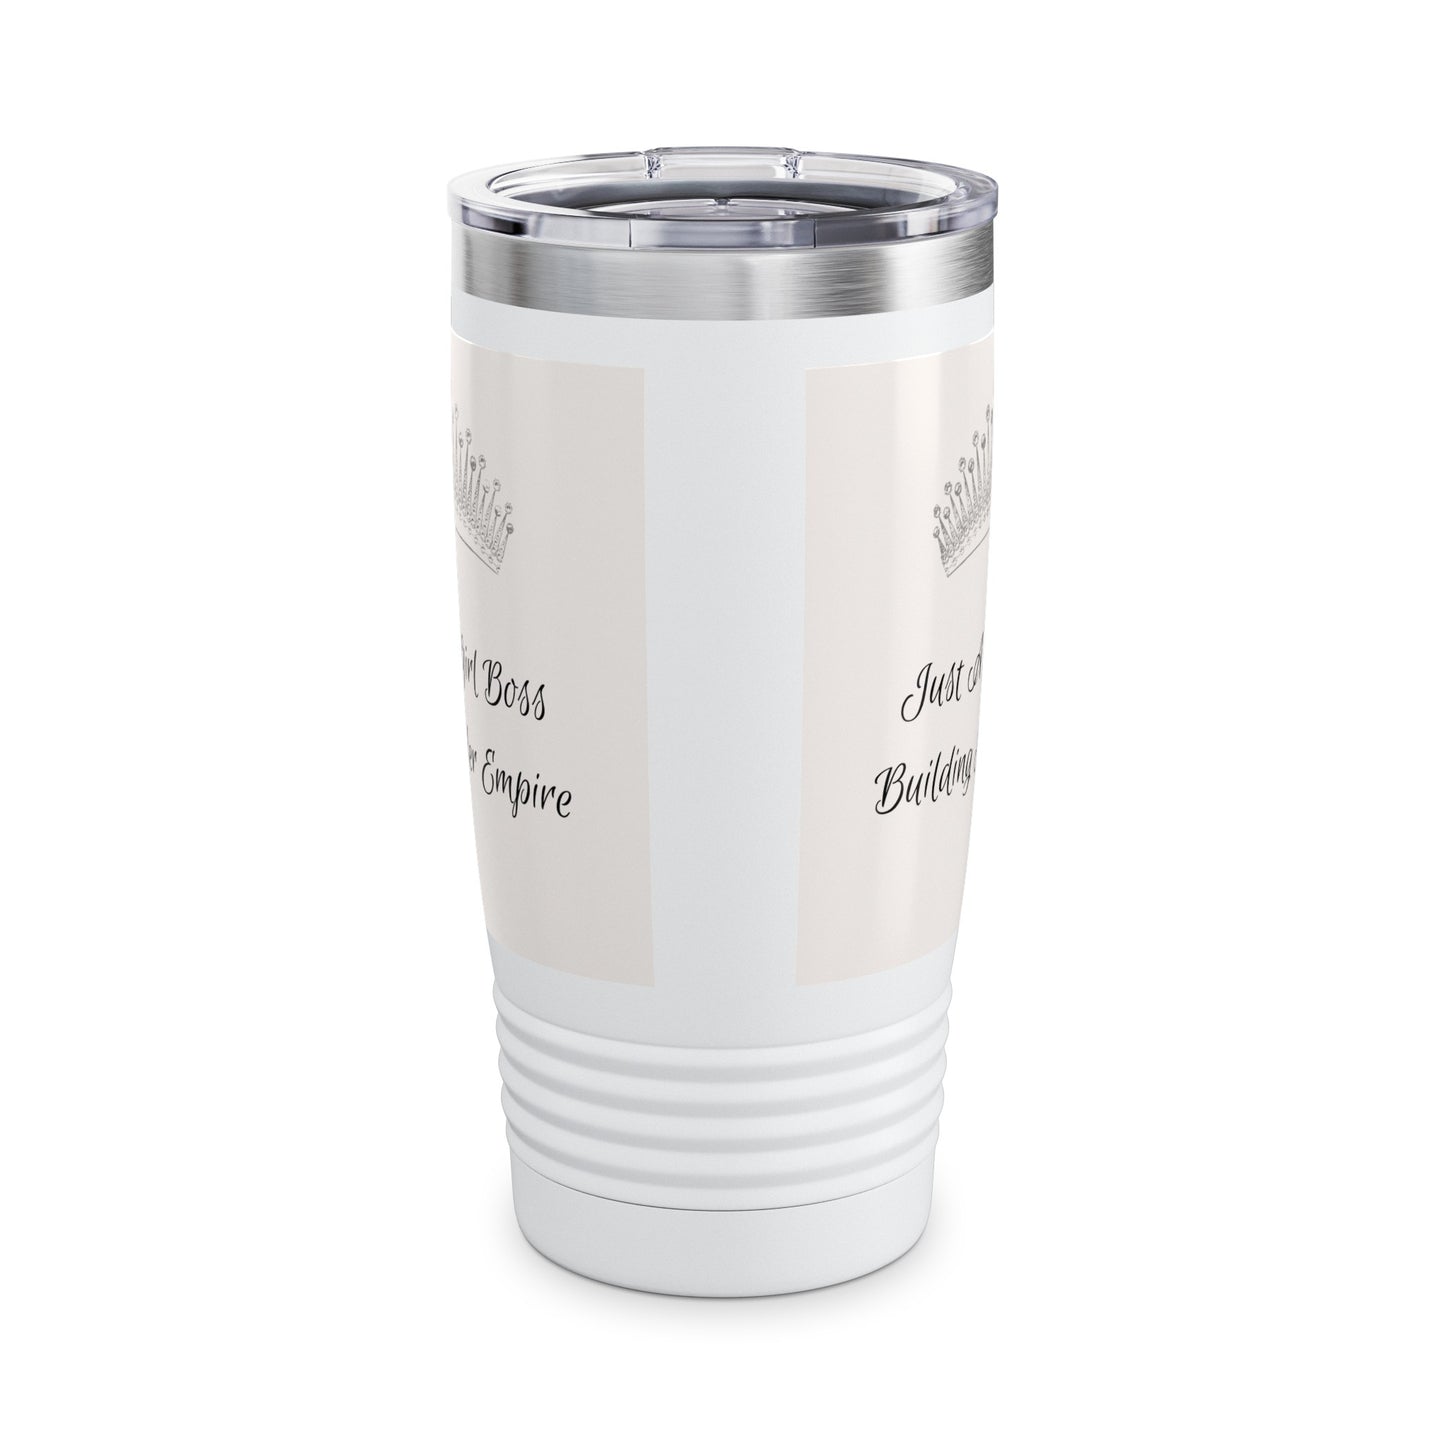 Just a girl boss building her empire travel coffee Ringneck Tumbler, 20oz